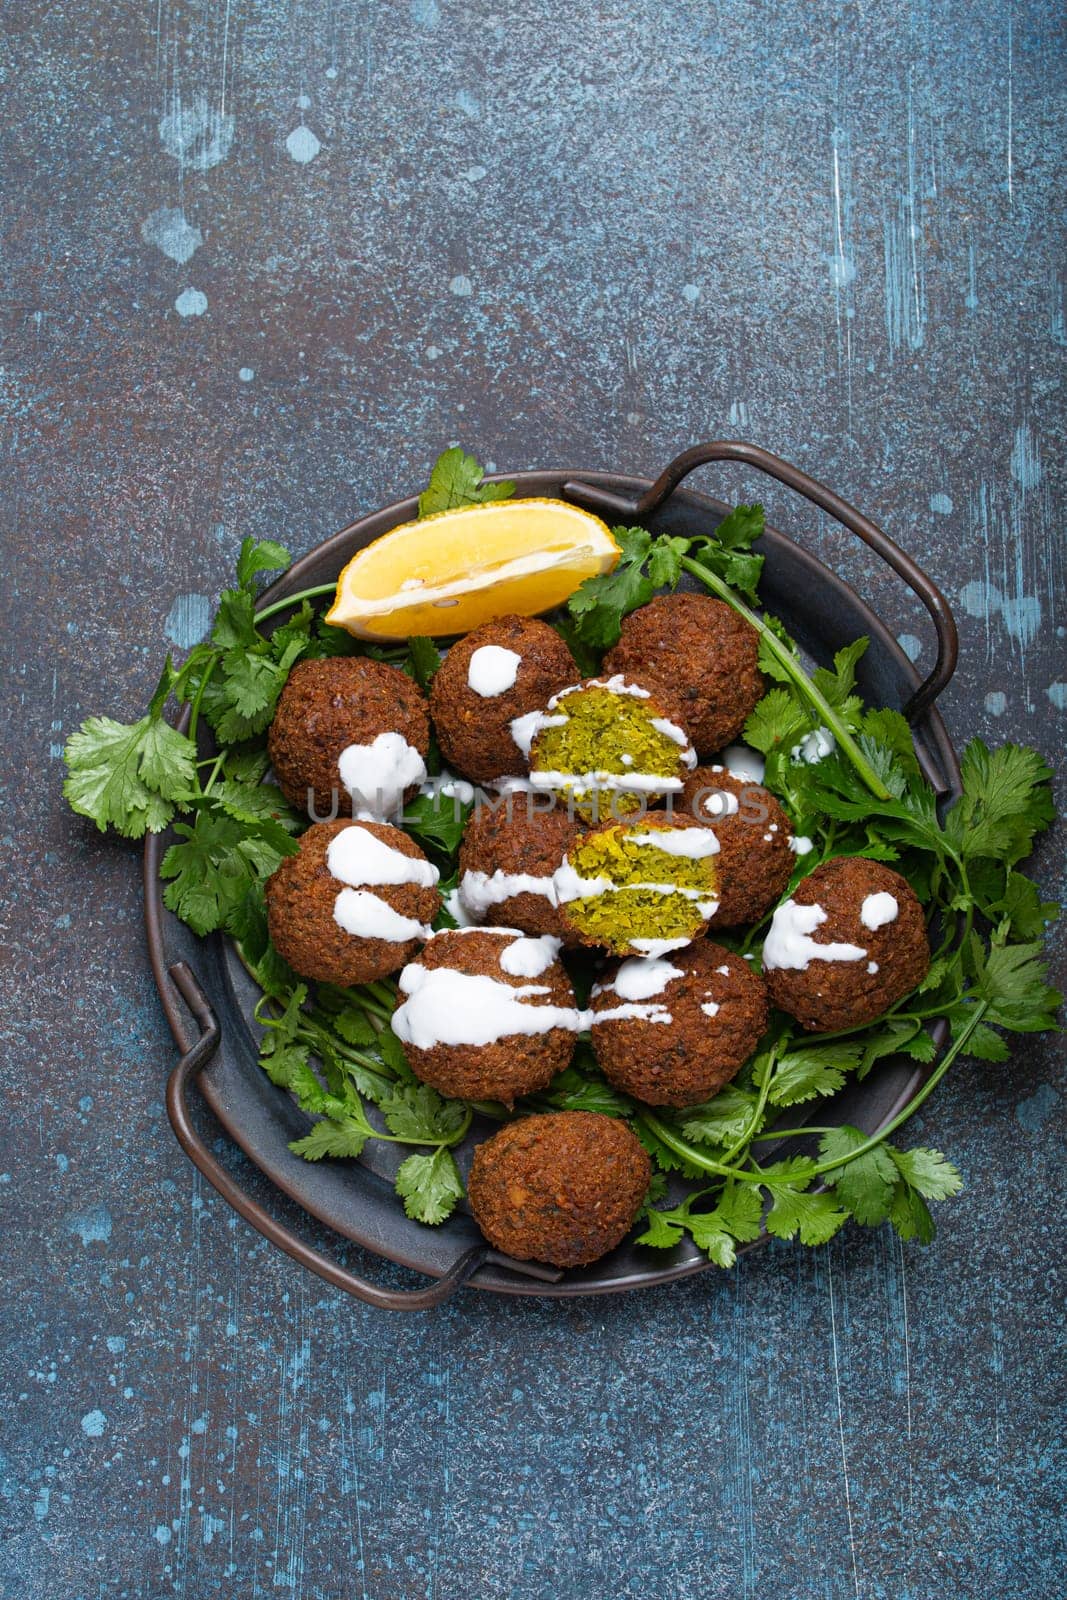 Plate of fried falafel balls served with fresh green cilantro and lemon, top view on rustic concrete background. Traditional vegan dish of Middle Eastern cuisine by its_al_dente